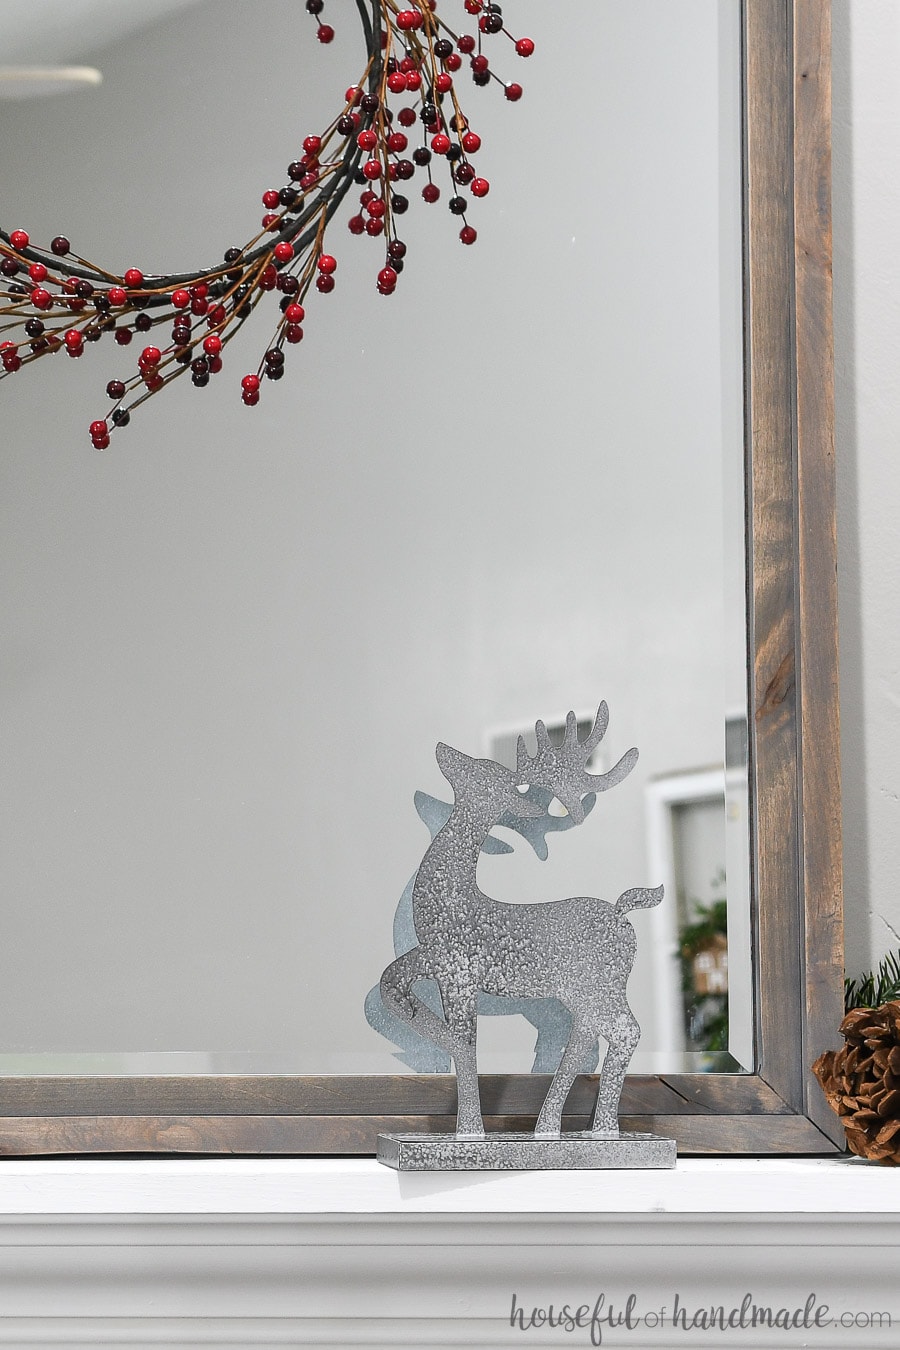 One paper reindeer decorations in front of a mirror under a red berry wreath.